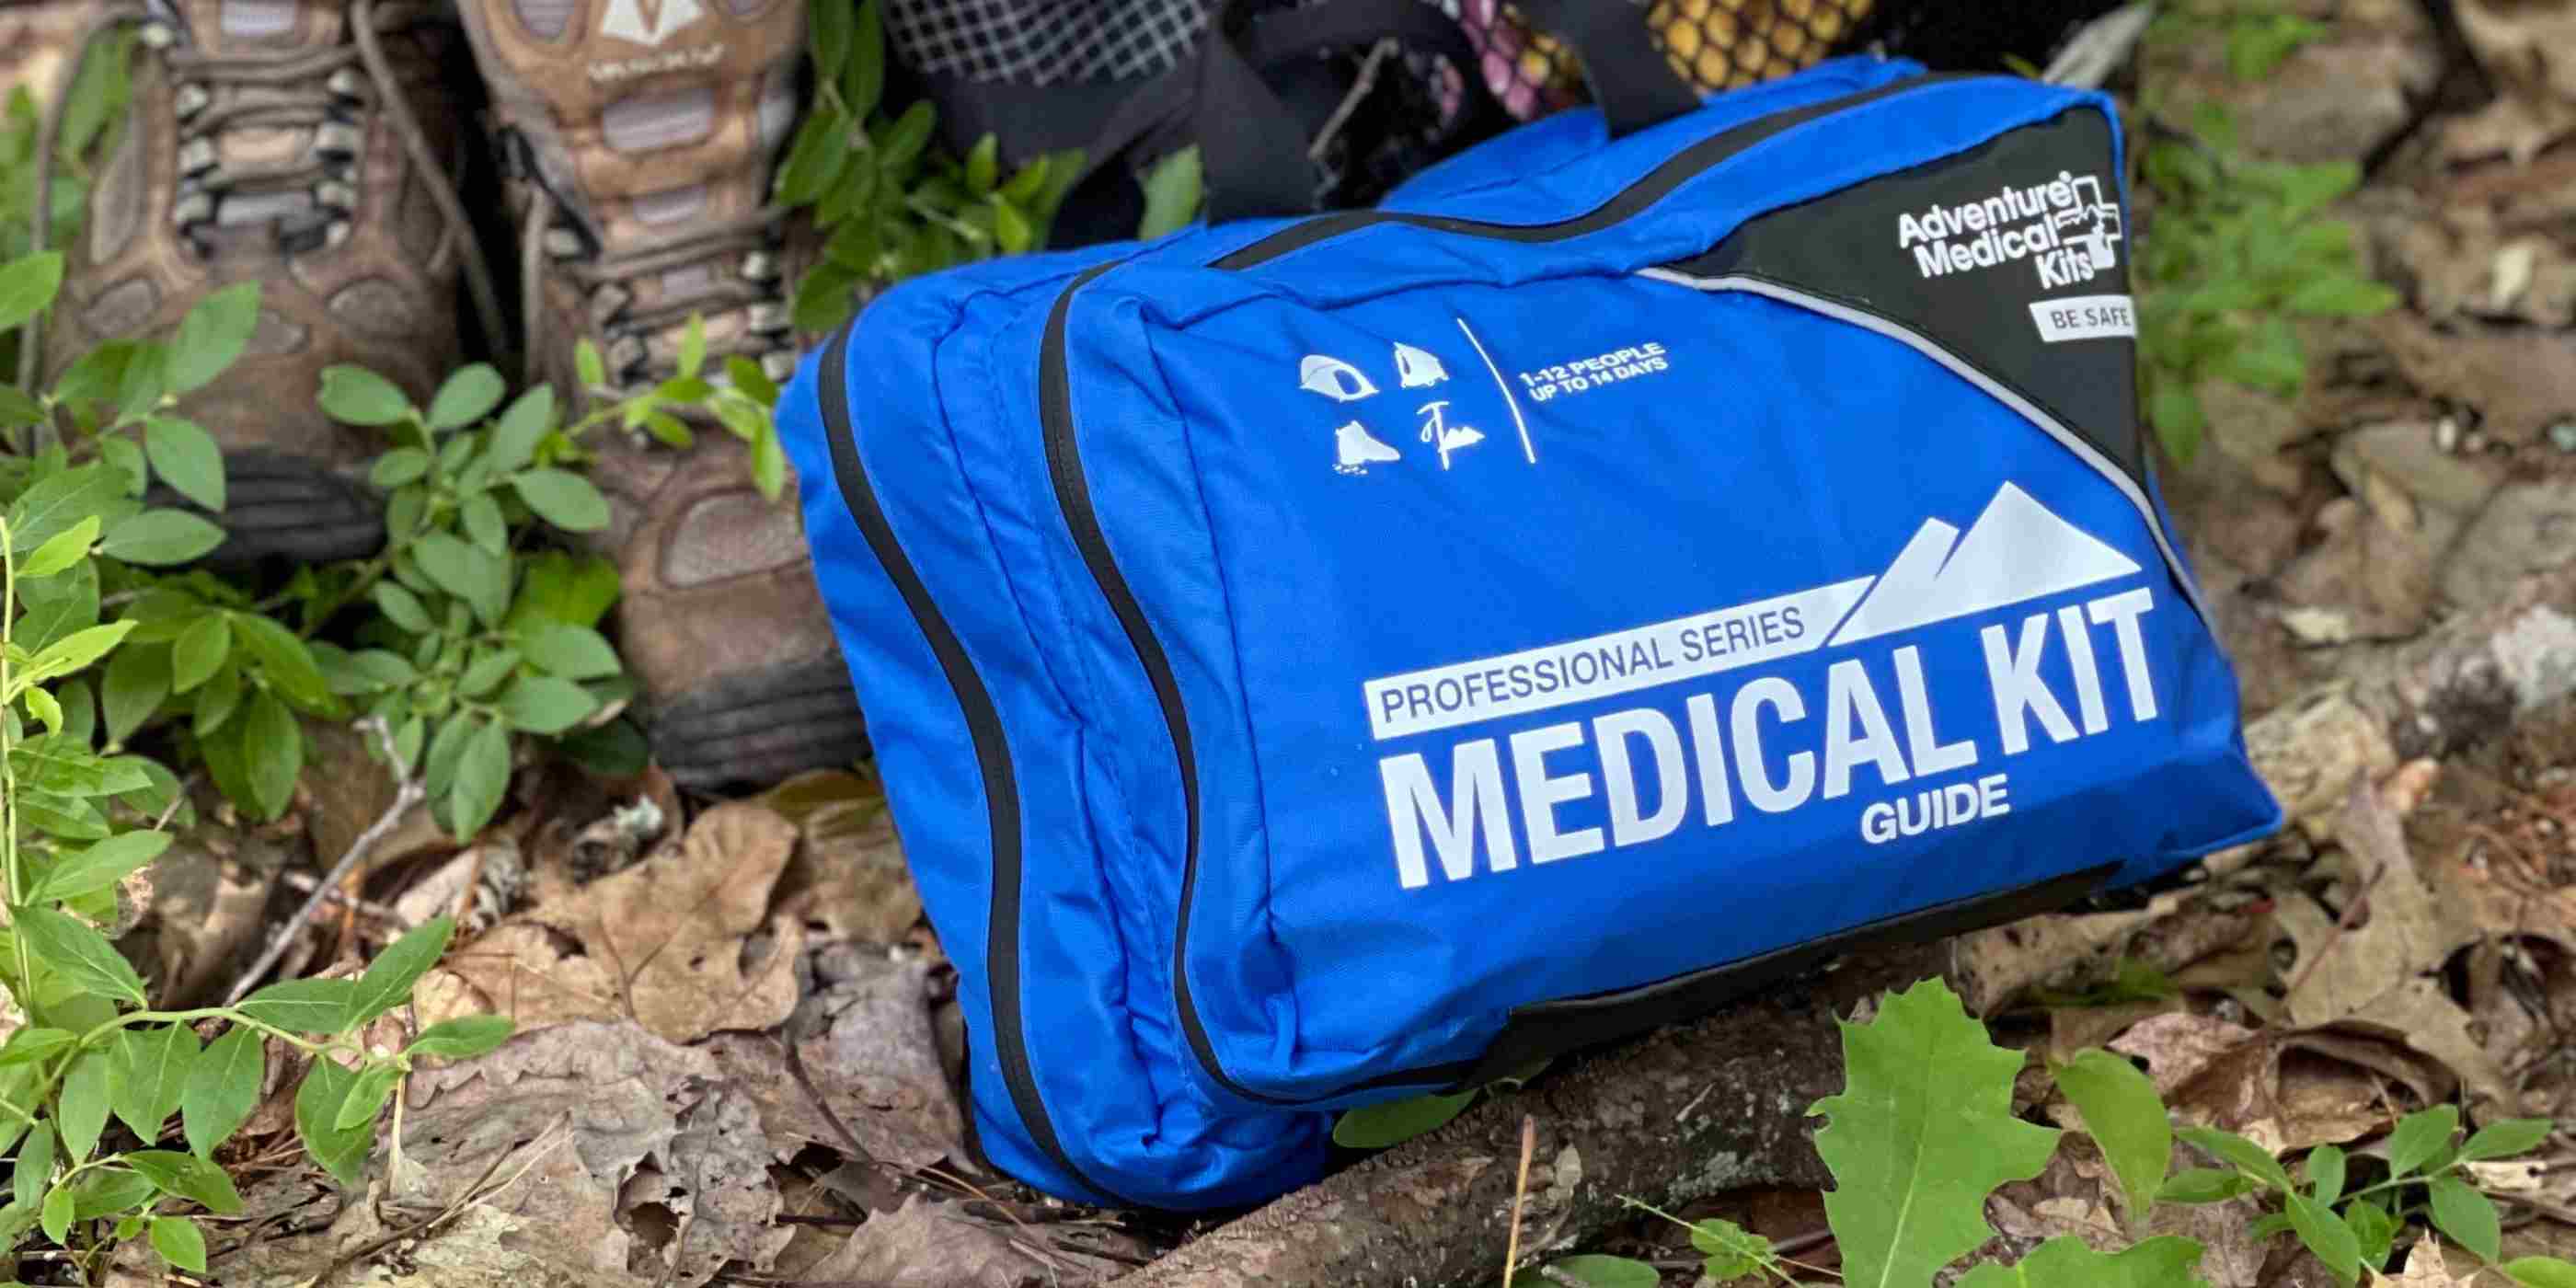 Pro Series Emergency Medical Kit - Guide I kit posed next to hiking gear